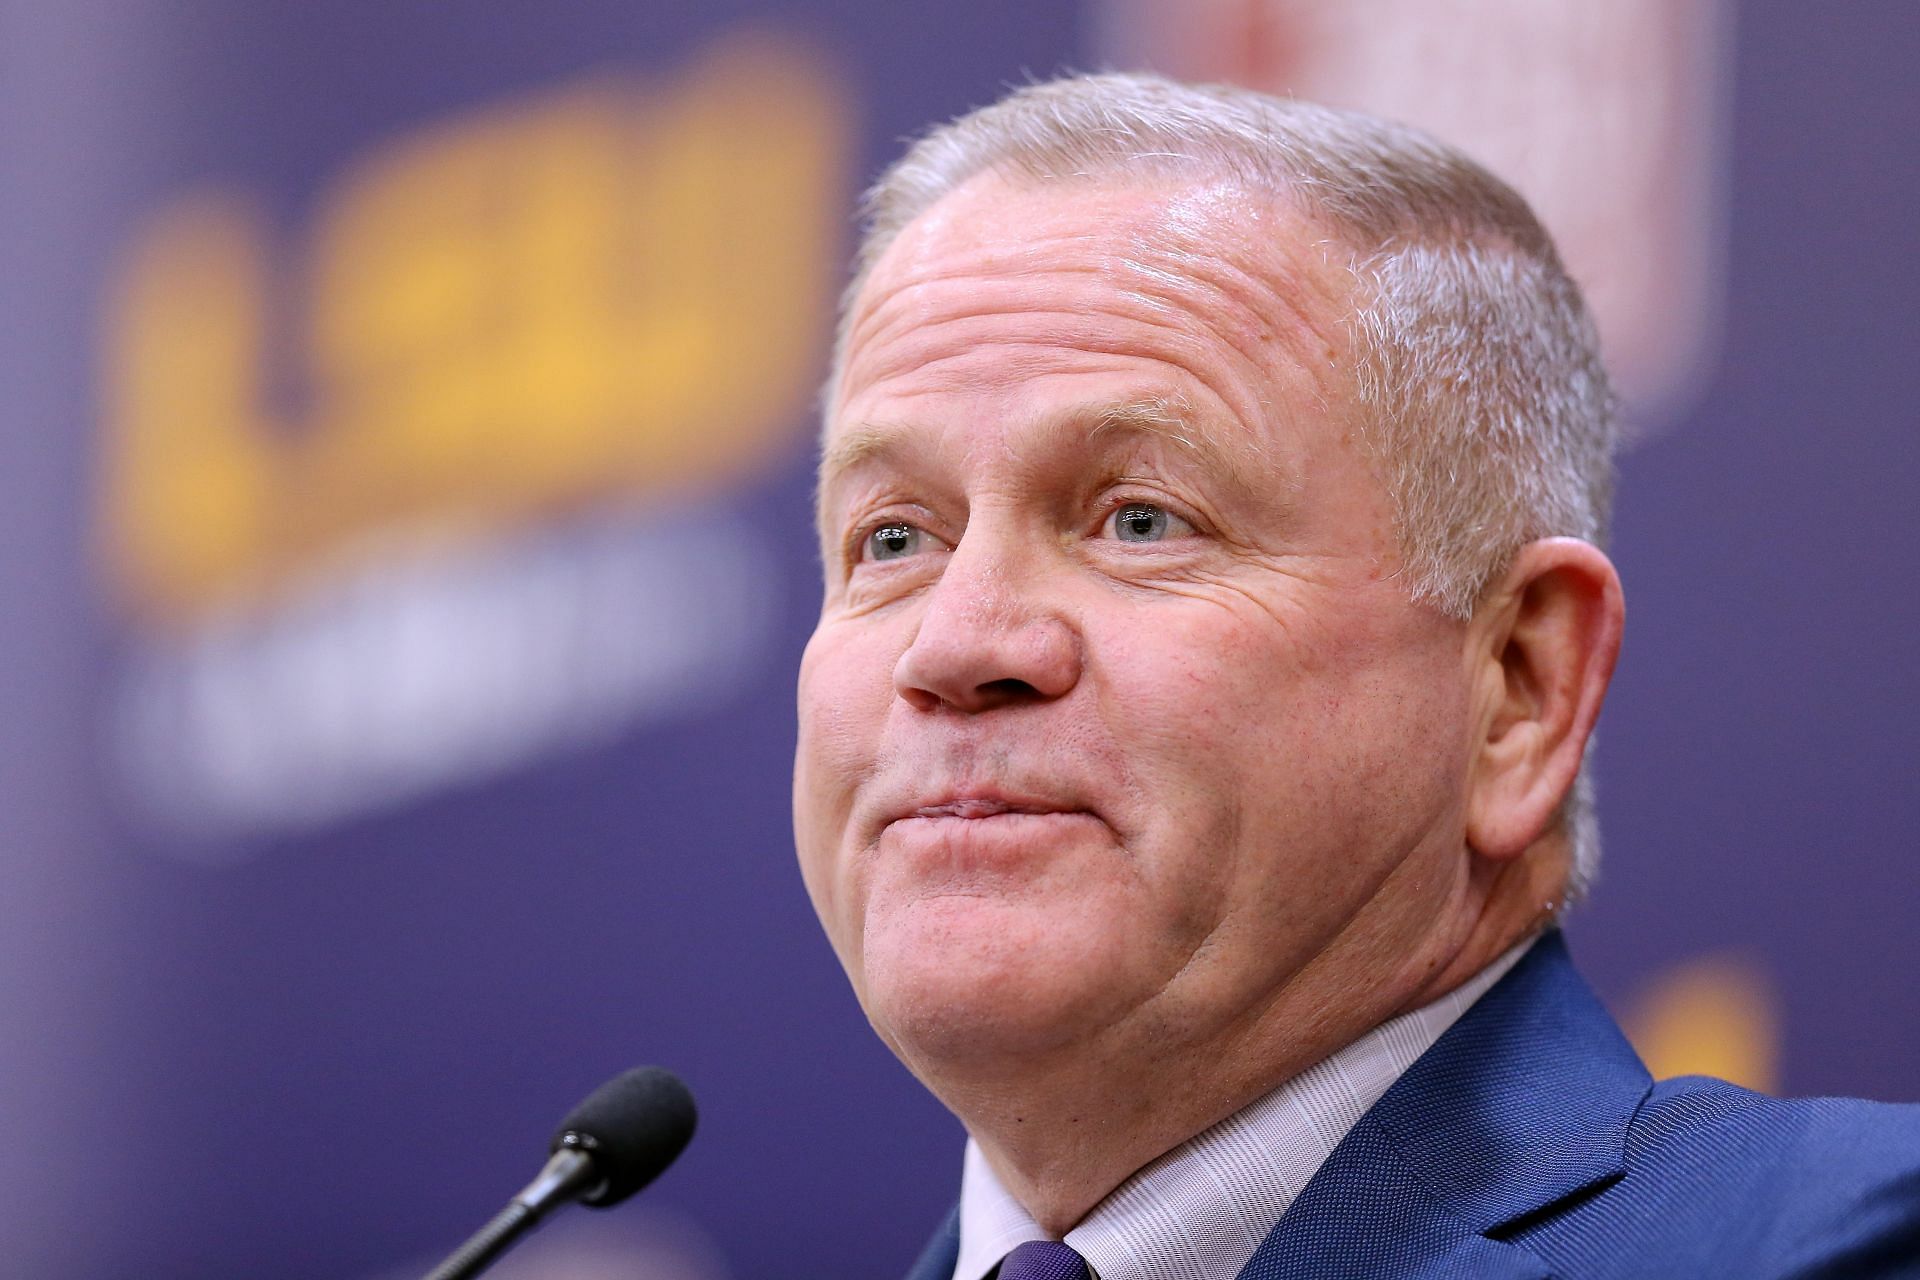 Brian Kelly speaks during a news conference at Tiger Stadium.